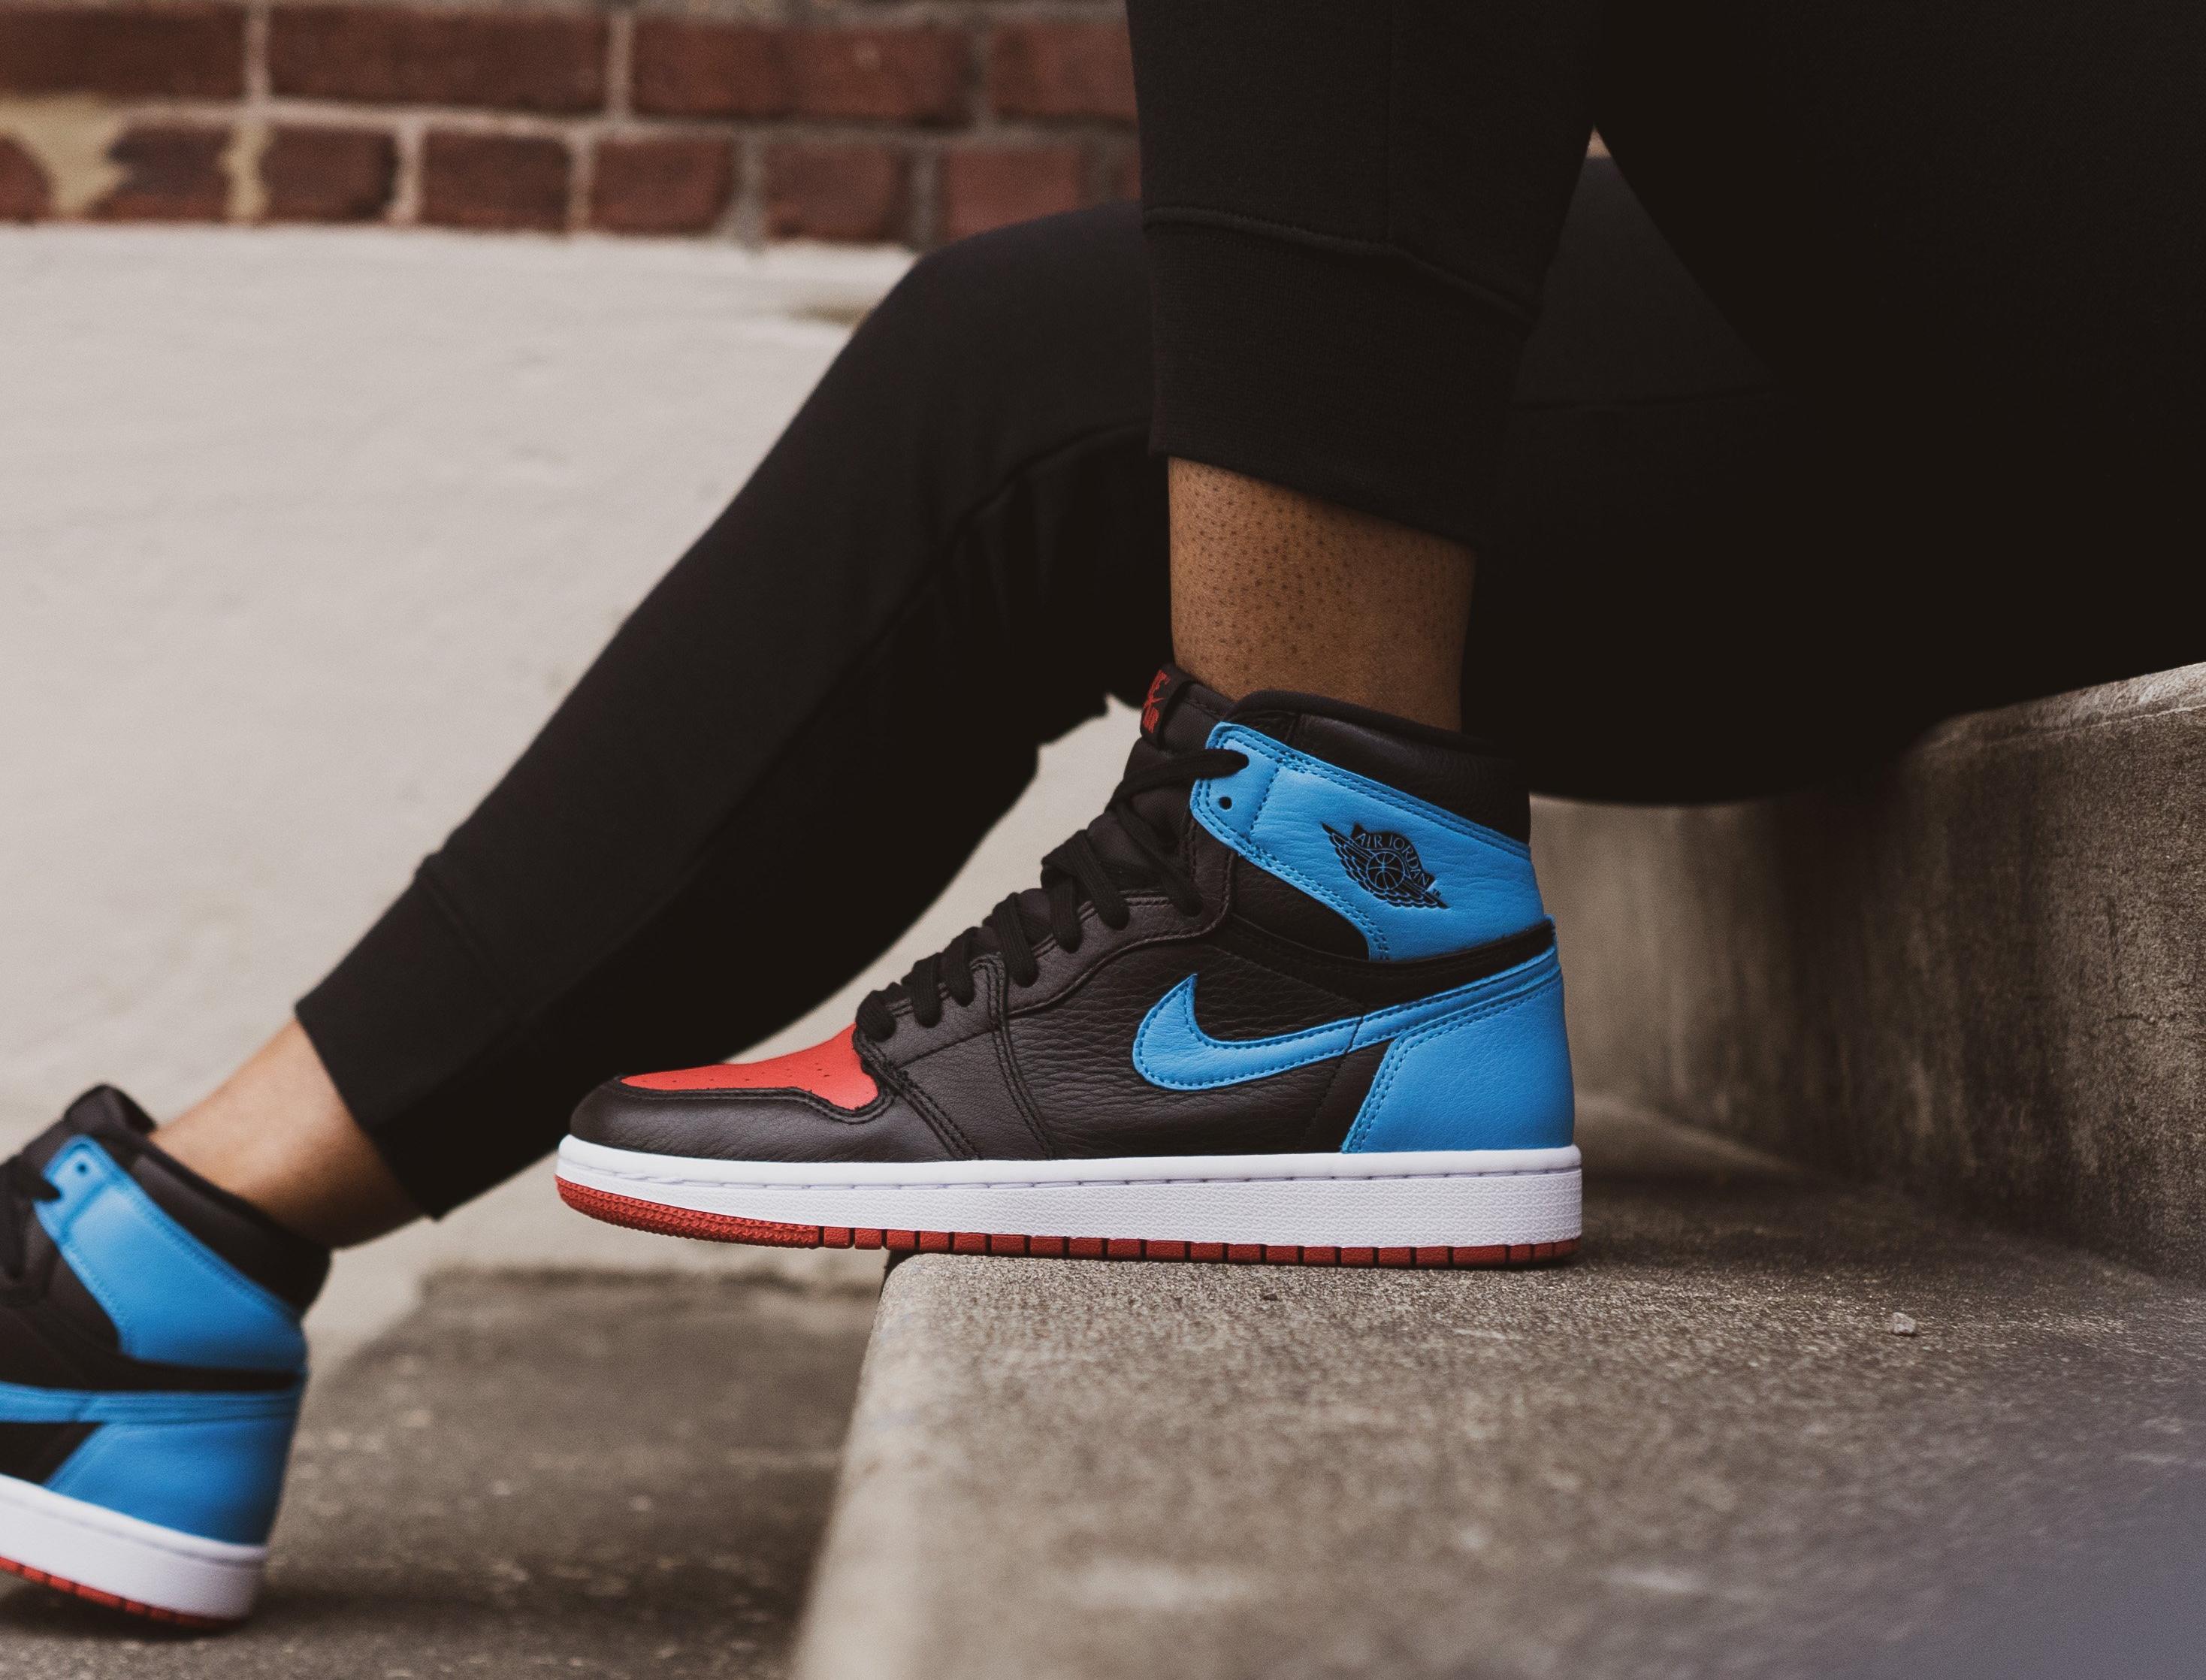 Sneakers Release &#8211; Air Jordan 1 OG &#8220;UNC to Chicago&#8221; Black/Powder Blue/Gym Red Women&#8217;s and Kids&#8217; Basketball Shoe